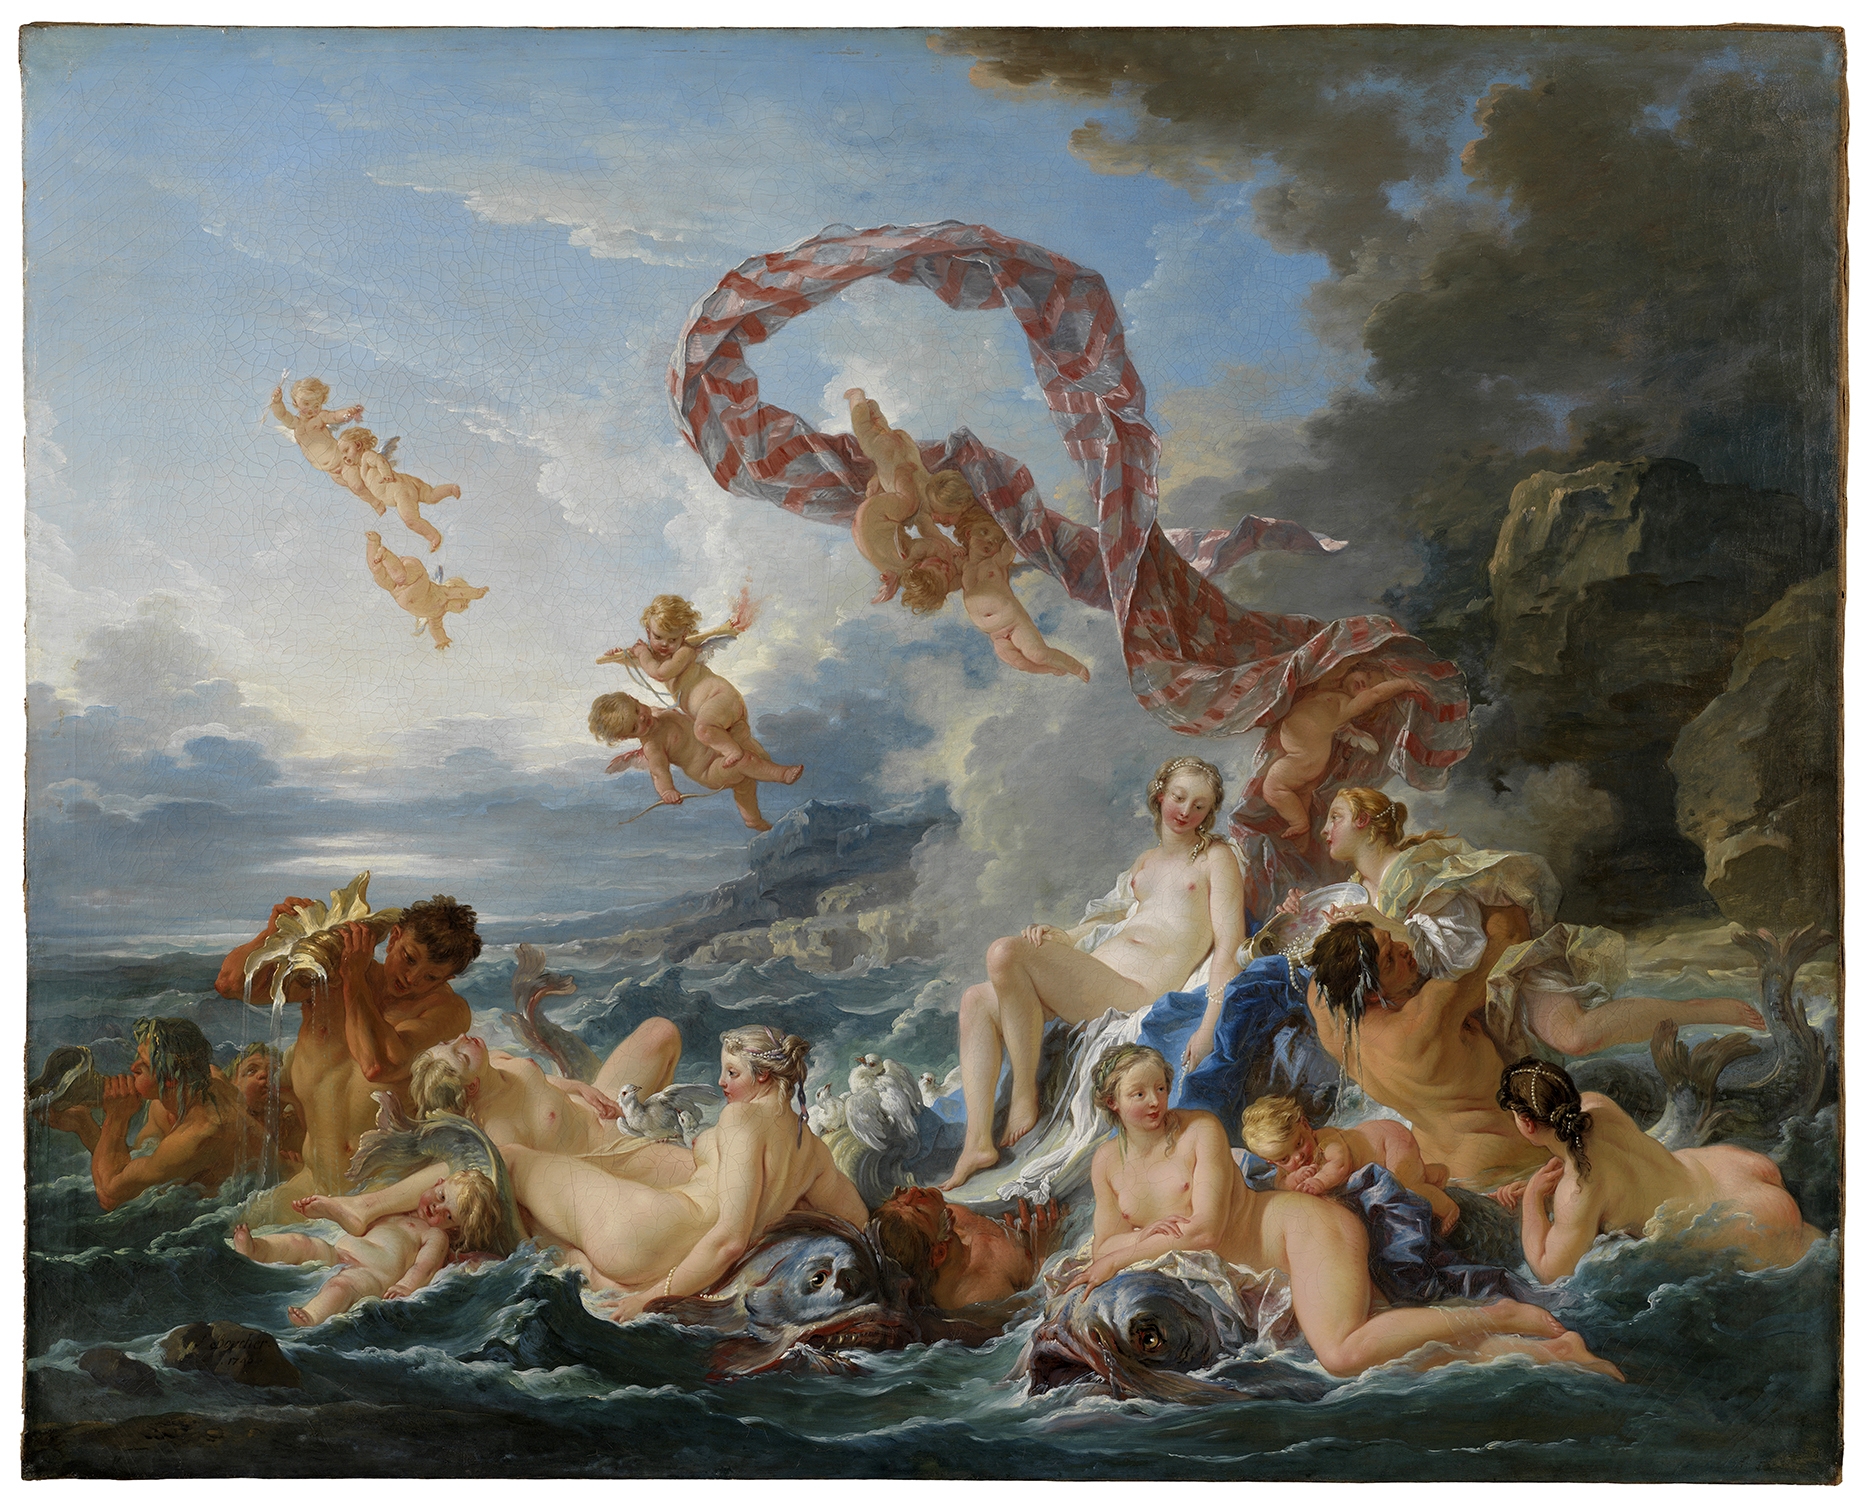 François Boucher (French, 1703–1770), “The Triumph of Venus,” 1740, oil on canvas. Nationalmuseum, Stockholm.All photos by Cecilia Heisser / Nationalmuseum.